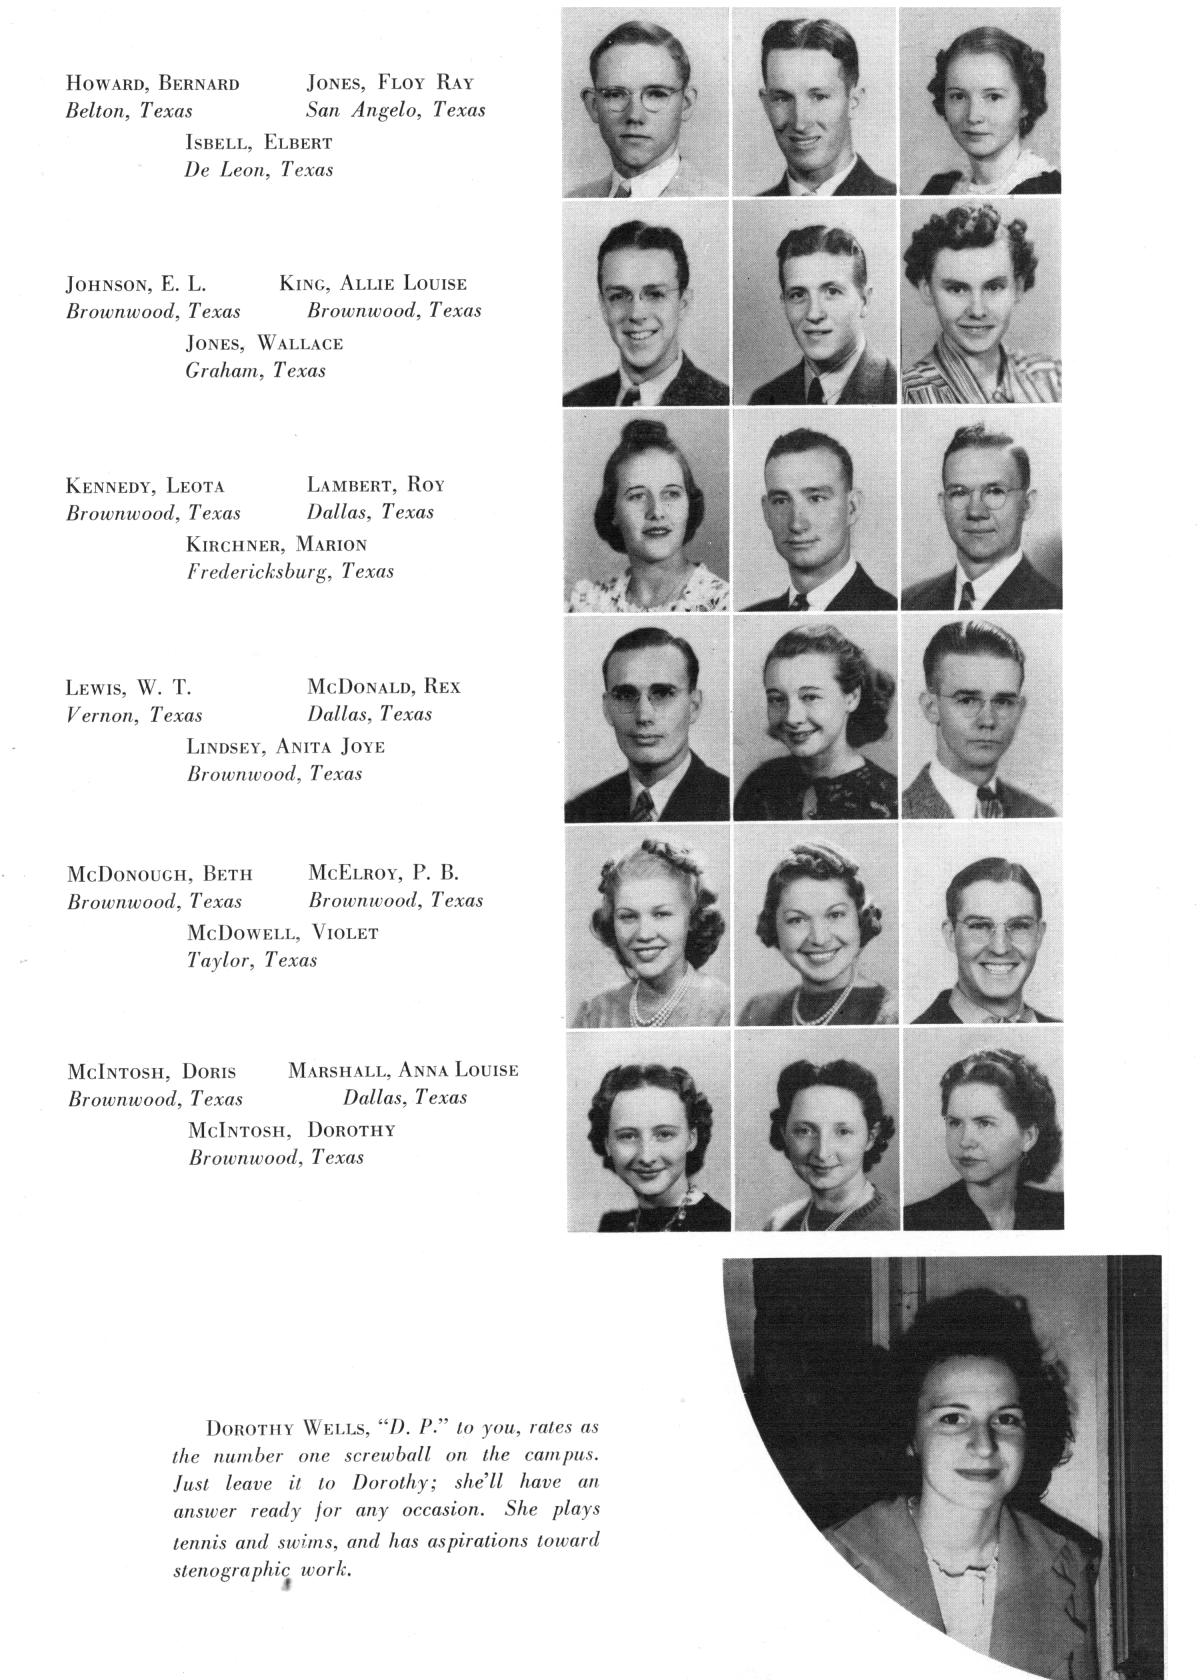 The Lasso, Yearbook of Howard Payne College, 1940
                                                
                                                    83
                                                